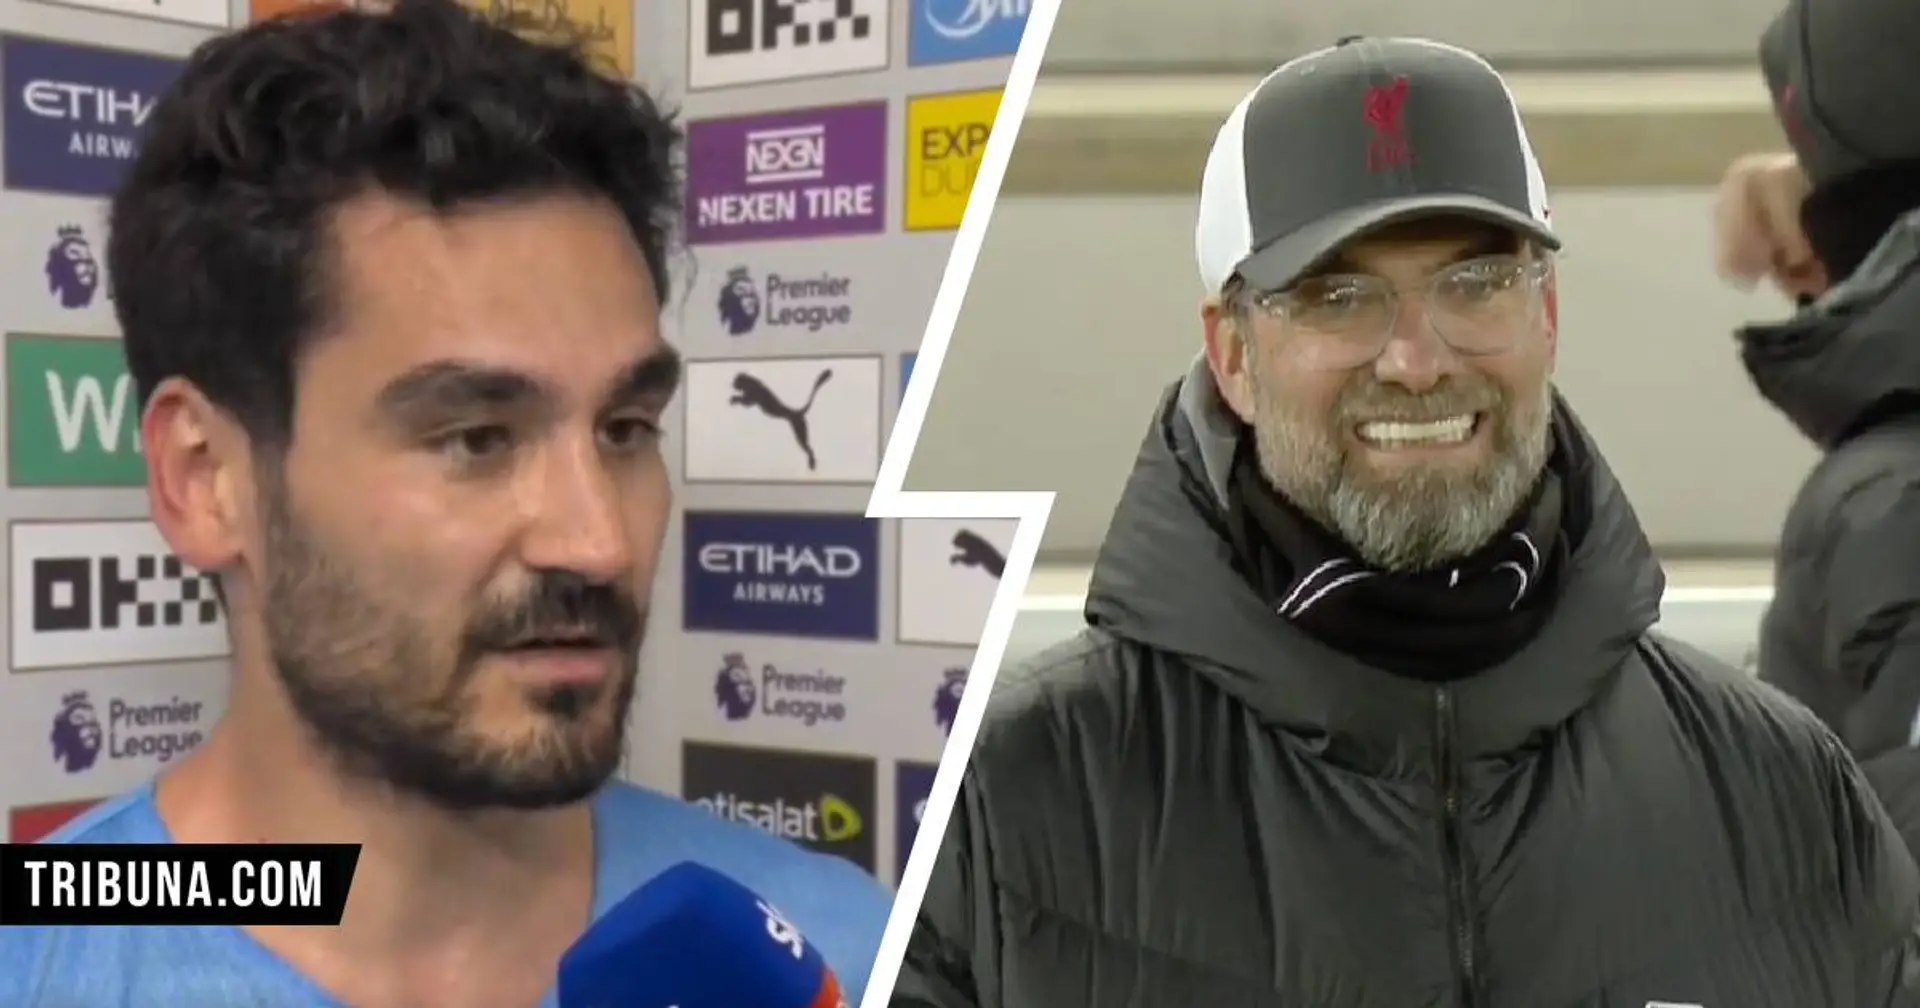 'You need to appreciate what they have done': Gundogan's message to Liverpool after winning title for Man City